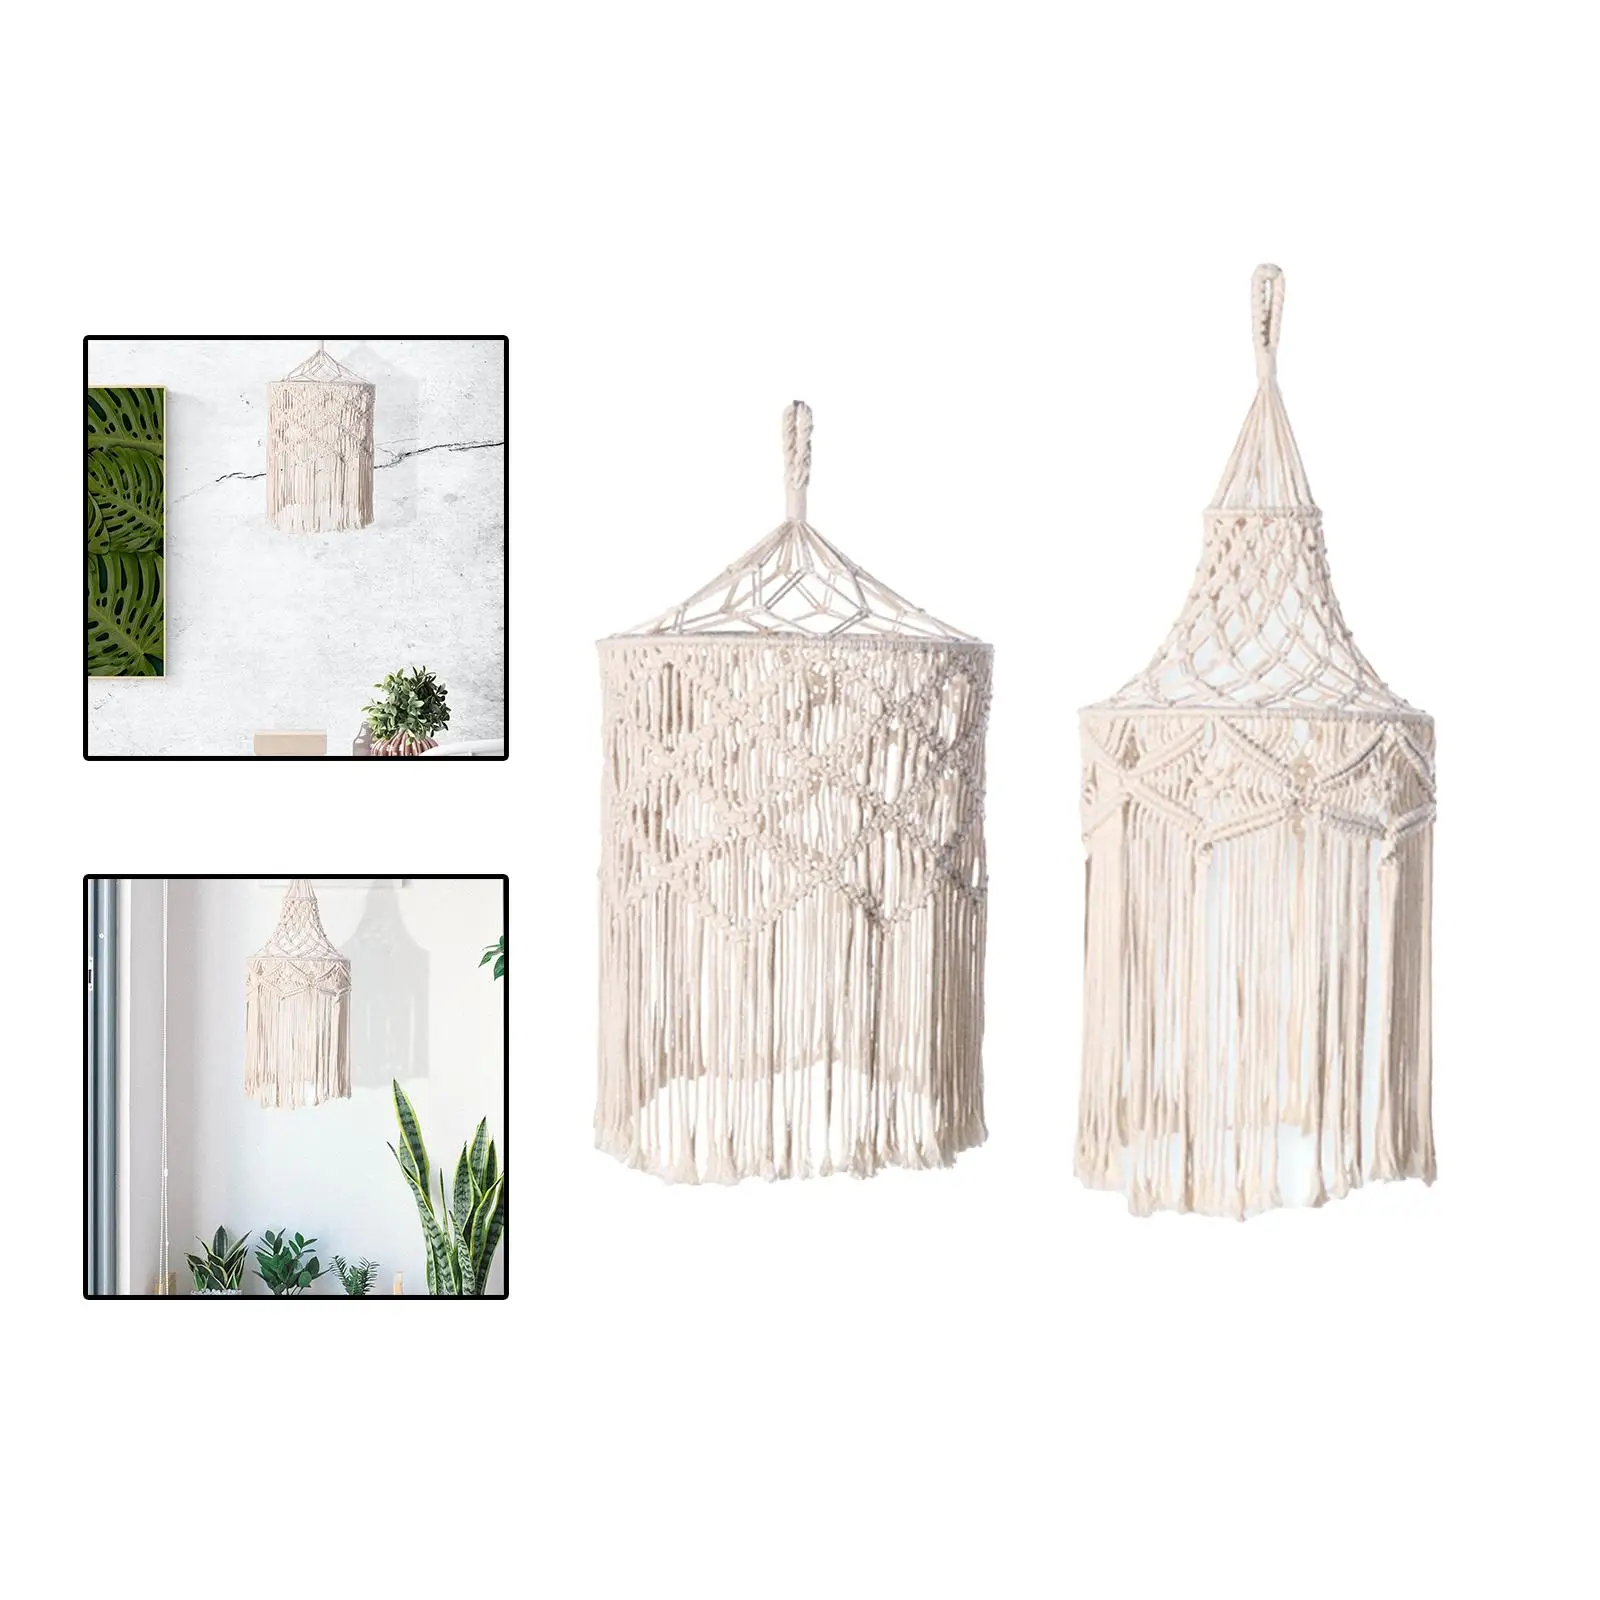 Ceiling Lights Fixture Cover Decor Hand Weaved Lighting Macrame Lampshade Boho Hanging Pendant Light Cover for Office Kitchen